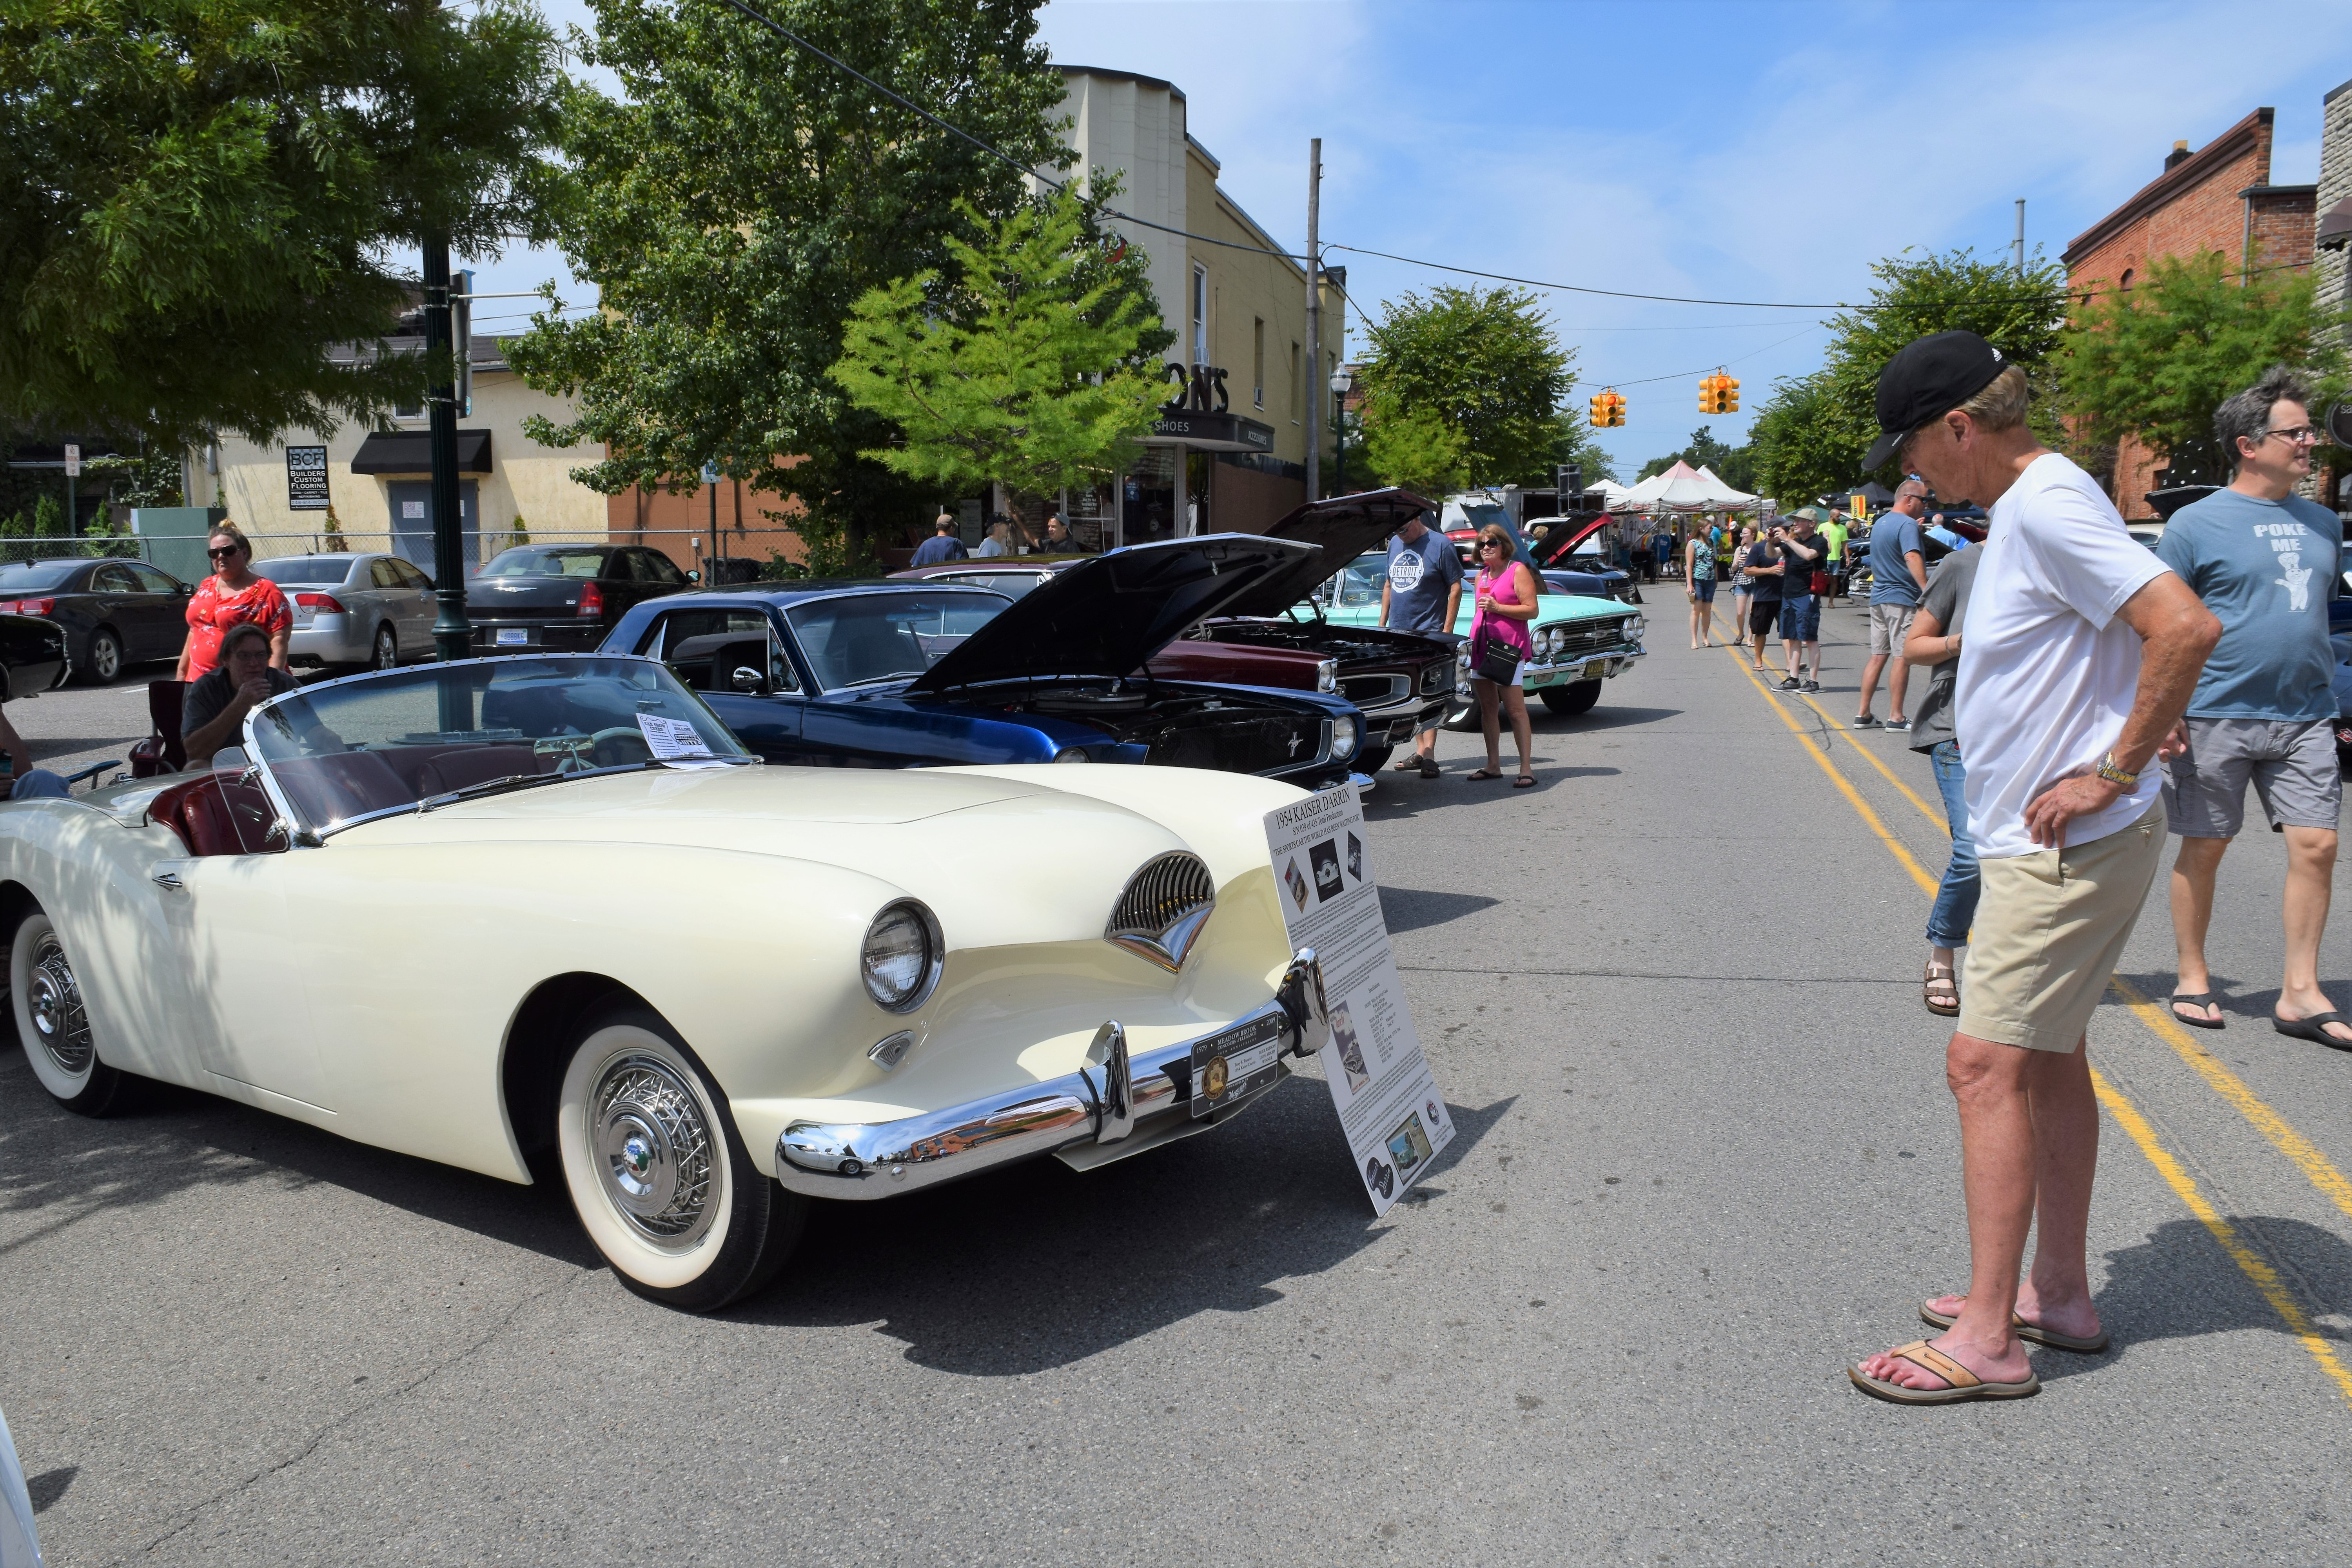 Kids & Kops charity car show rolls into downtown Lake Orion